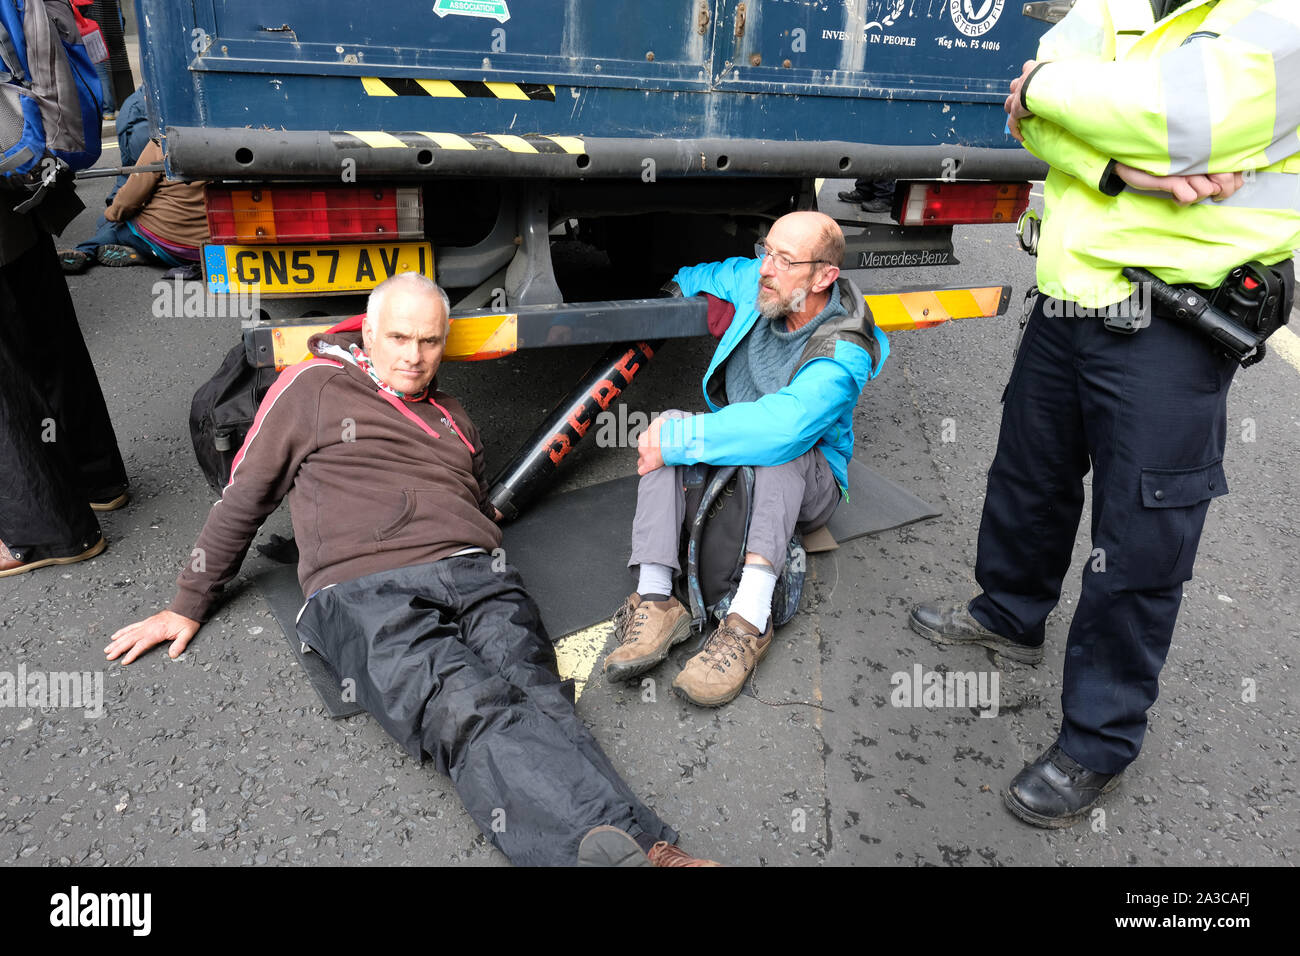 Westminster, London, UK - Monday 7th October 2019 - Extinction Rebellion XR climate protesters block Marsham Street directly outside the Home Office - the protesters parked a van across the road and several have then glued themselves to the vehicle - Police watch on. Photo Steven May / Alamy Live News Stock Photo